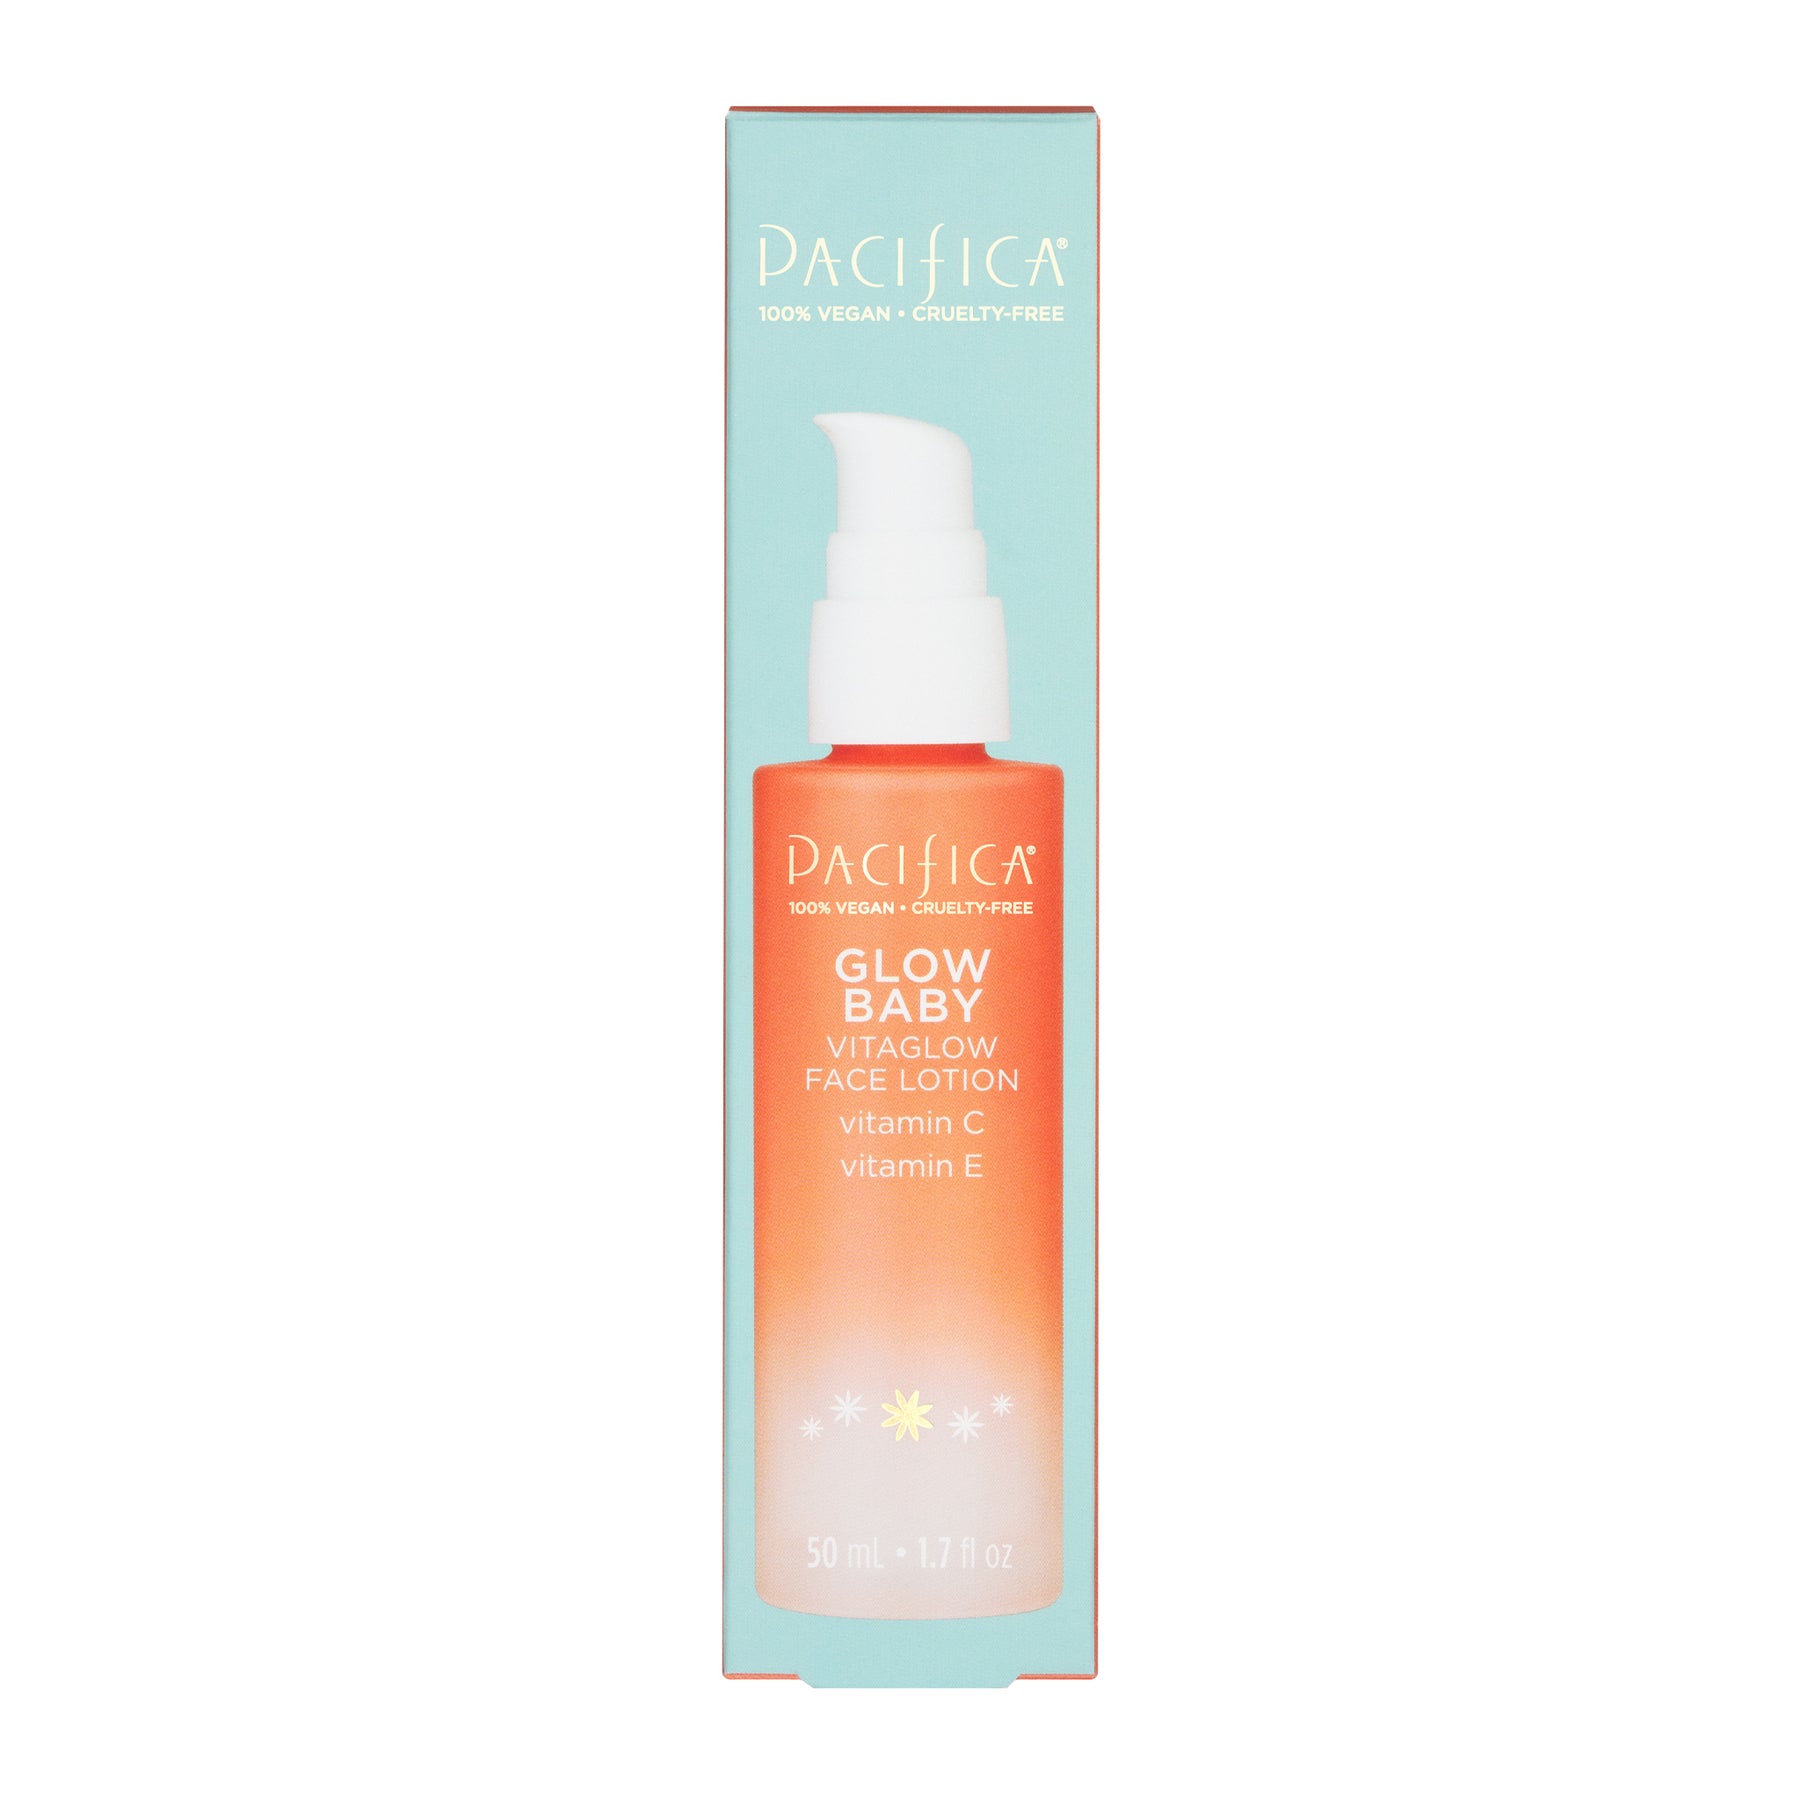 Glow Baby VitaGlow Face Lotion - Skin Care - Pacifica Beauty